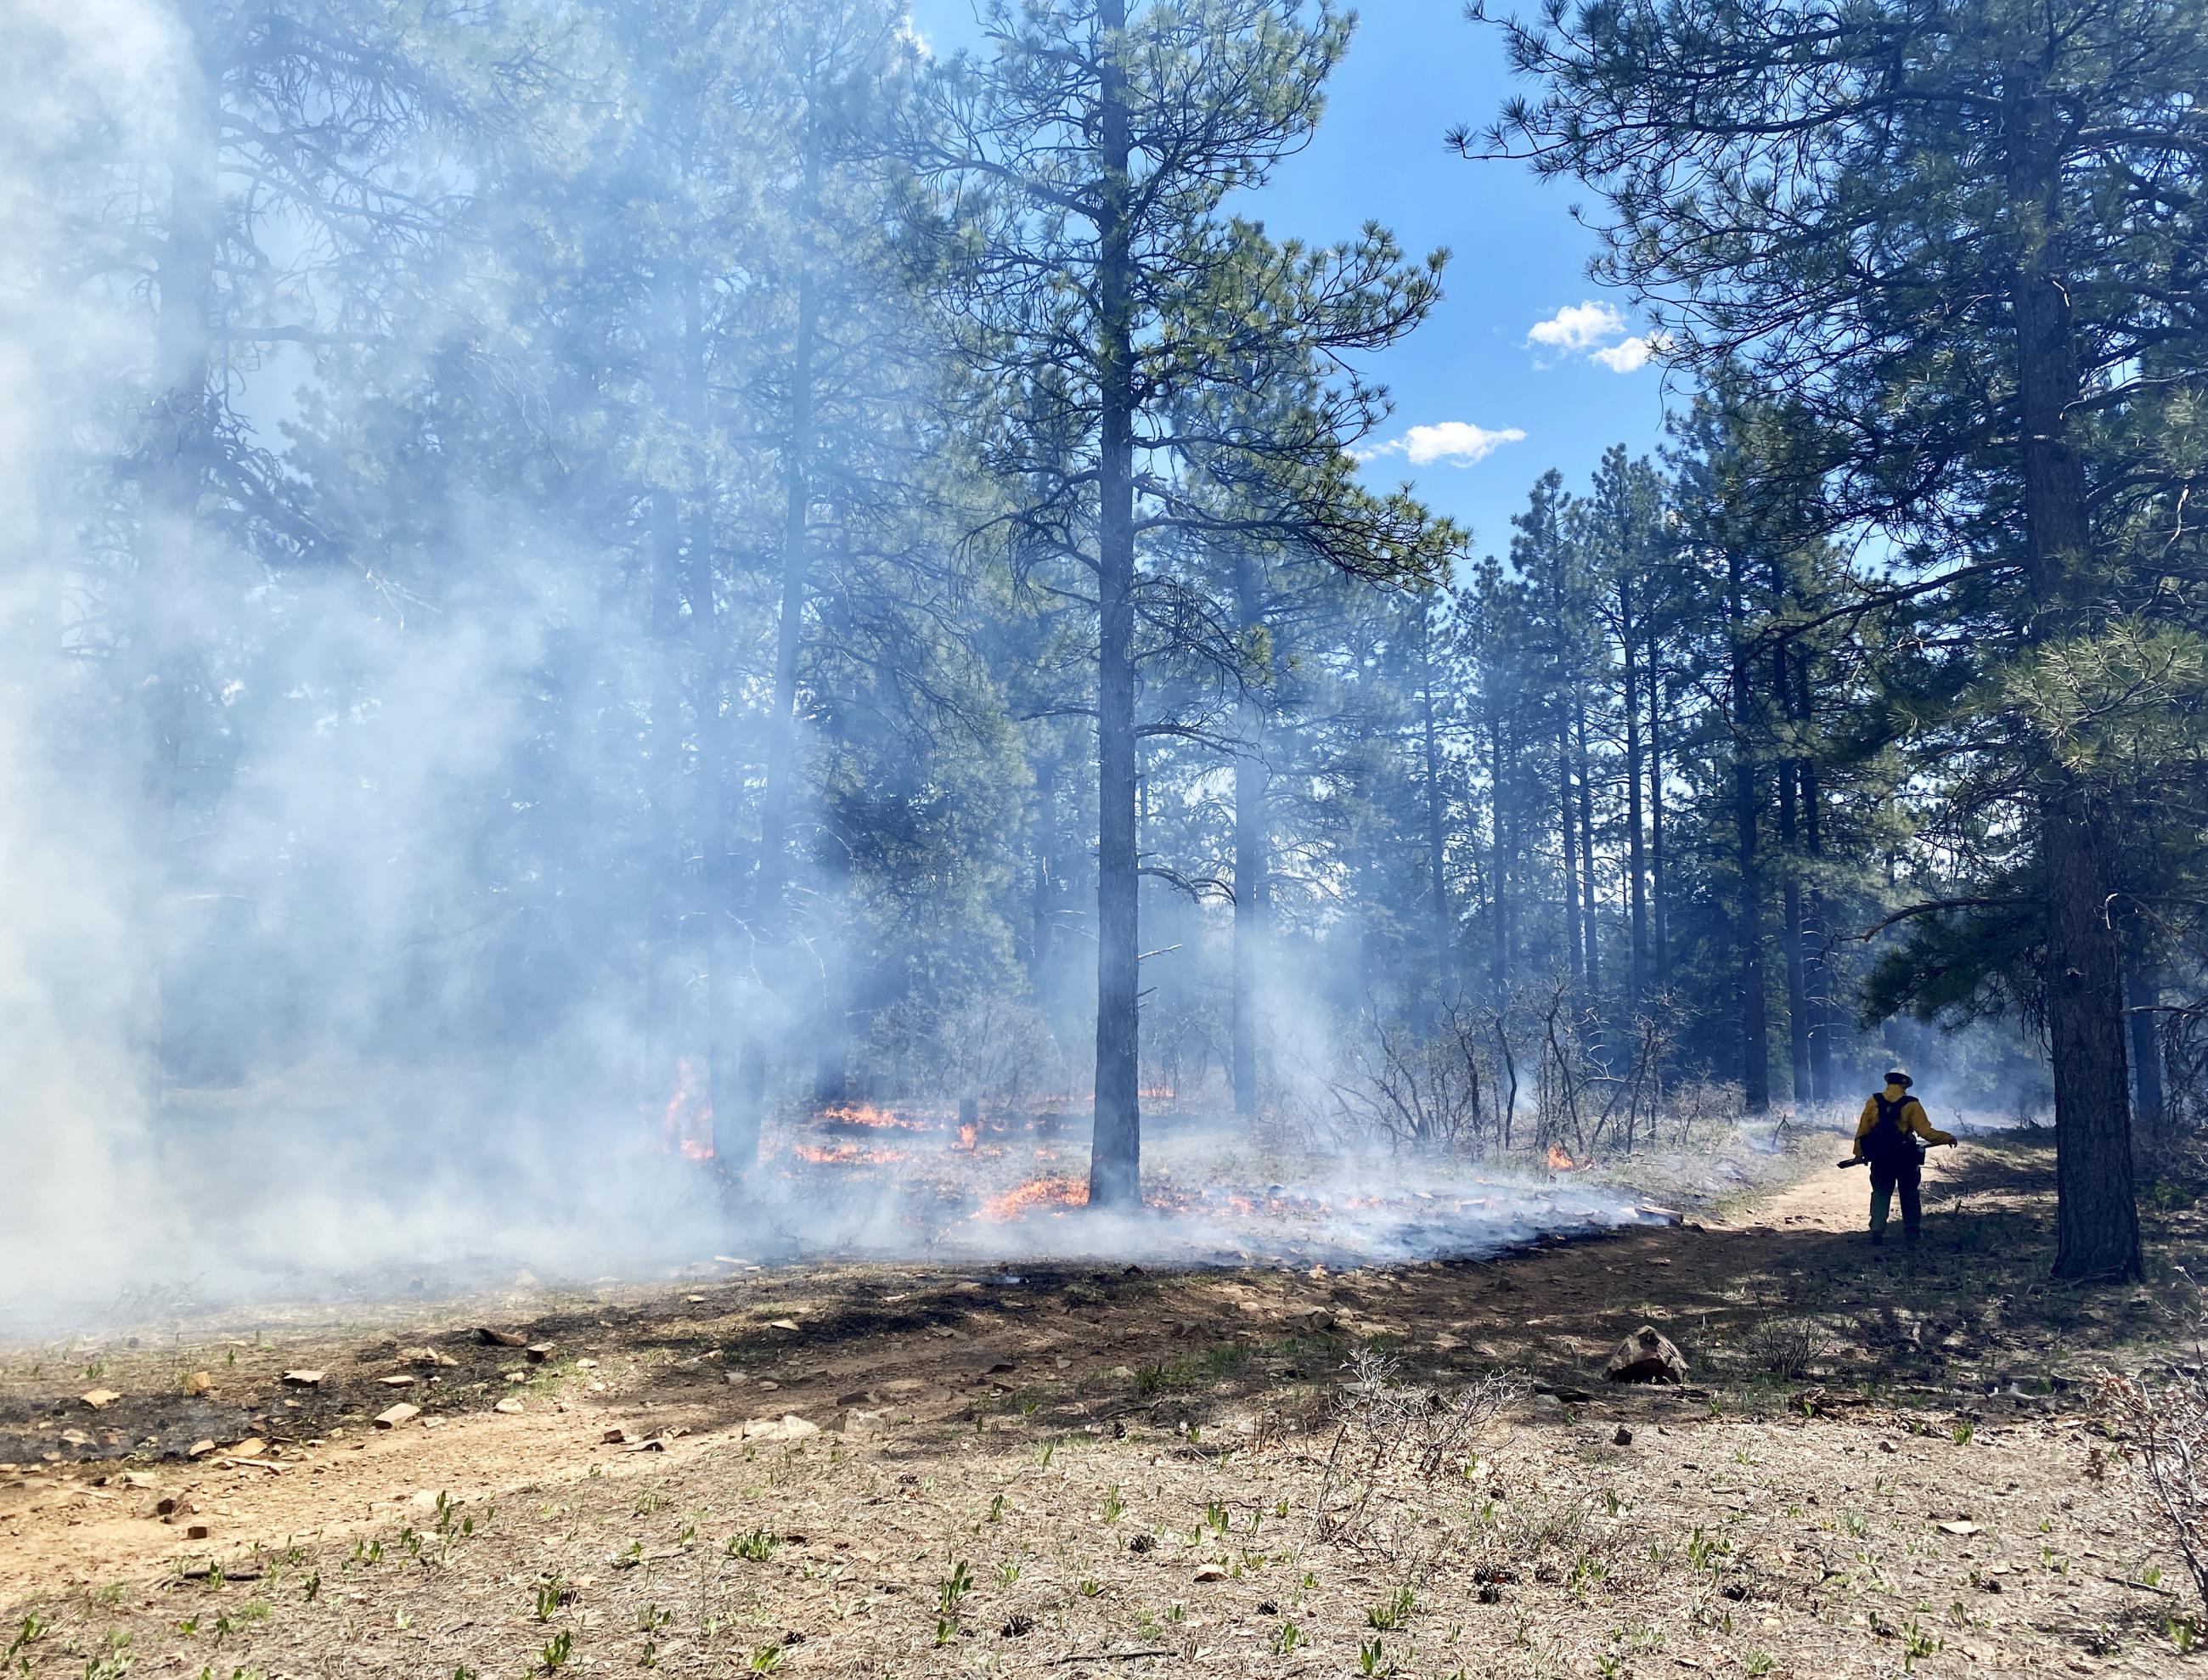 Ponderosa pine forest in the background with a dirt road running through the bottom third of the image. There is a firefighter wearing green pants, a pack, a yellow shirt, and a white hard hat. There are short flames in the trees and smoke across the image. 